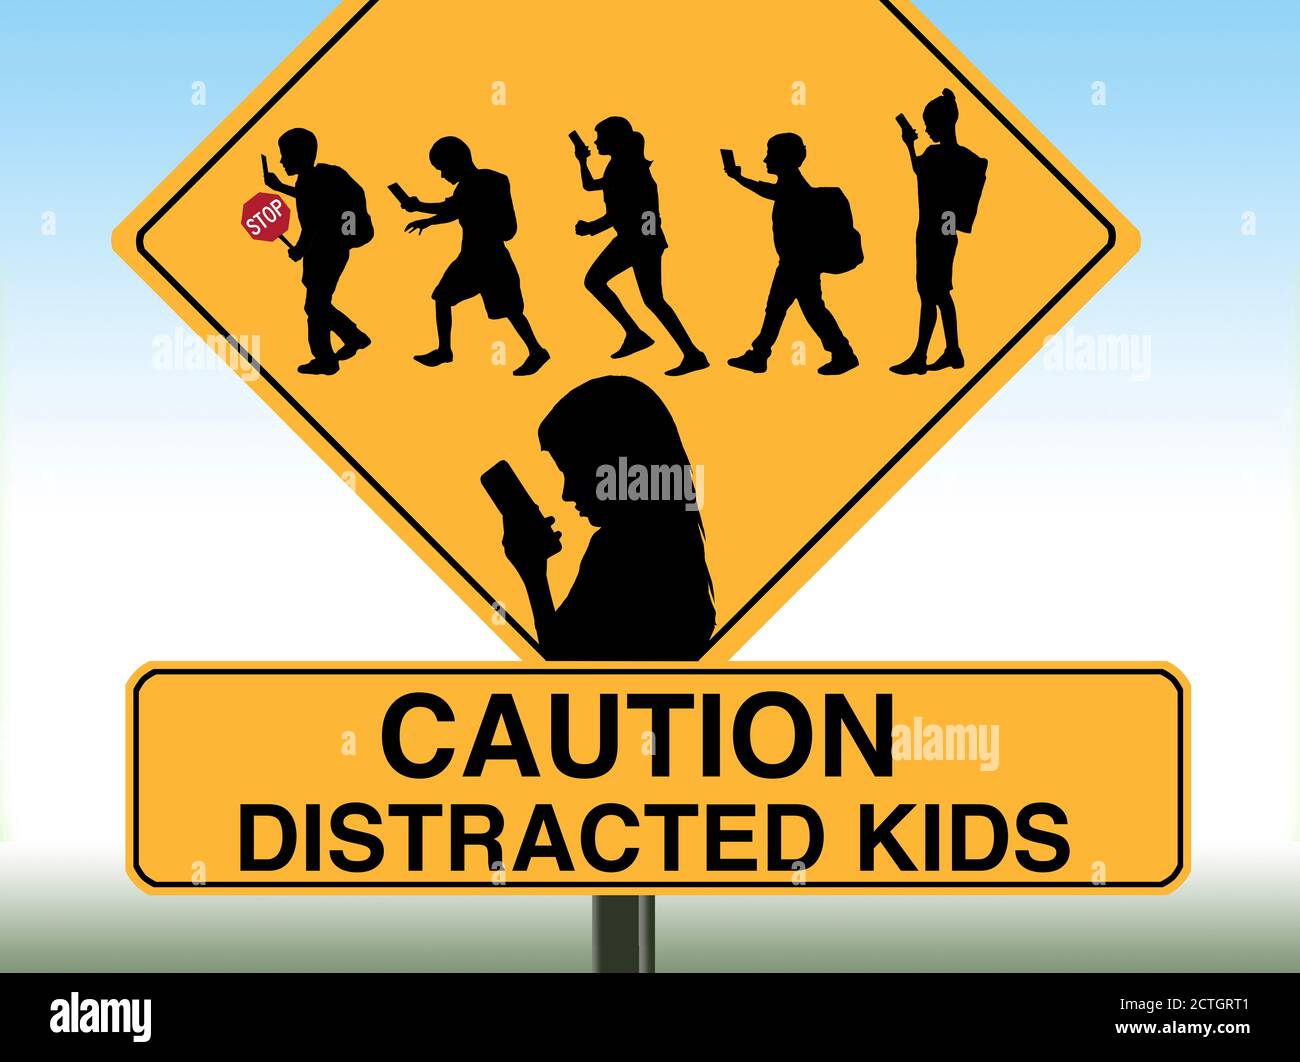 A school crossing sign includes silhouettes of children using cell phones. Stock Photo